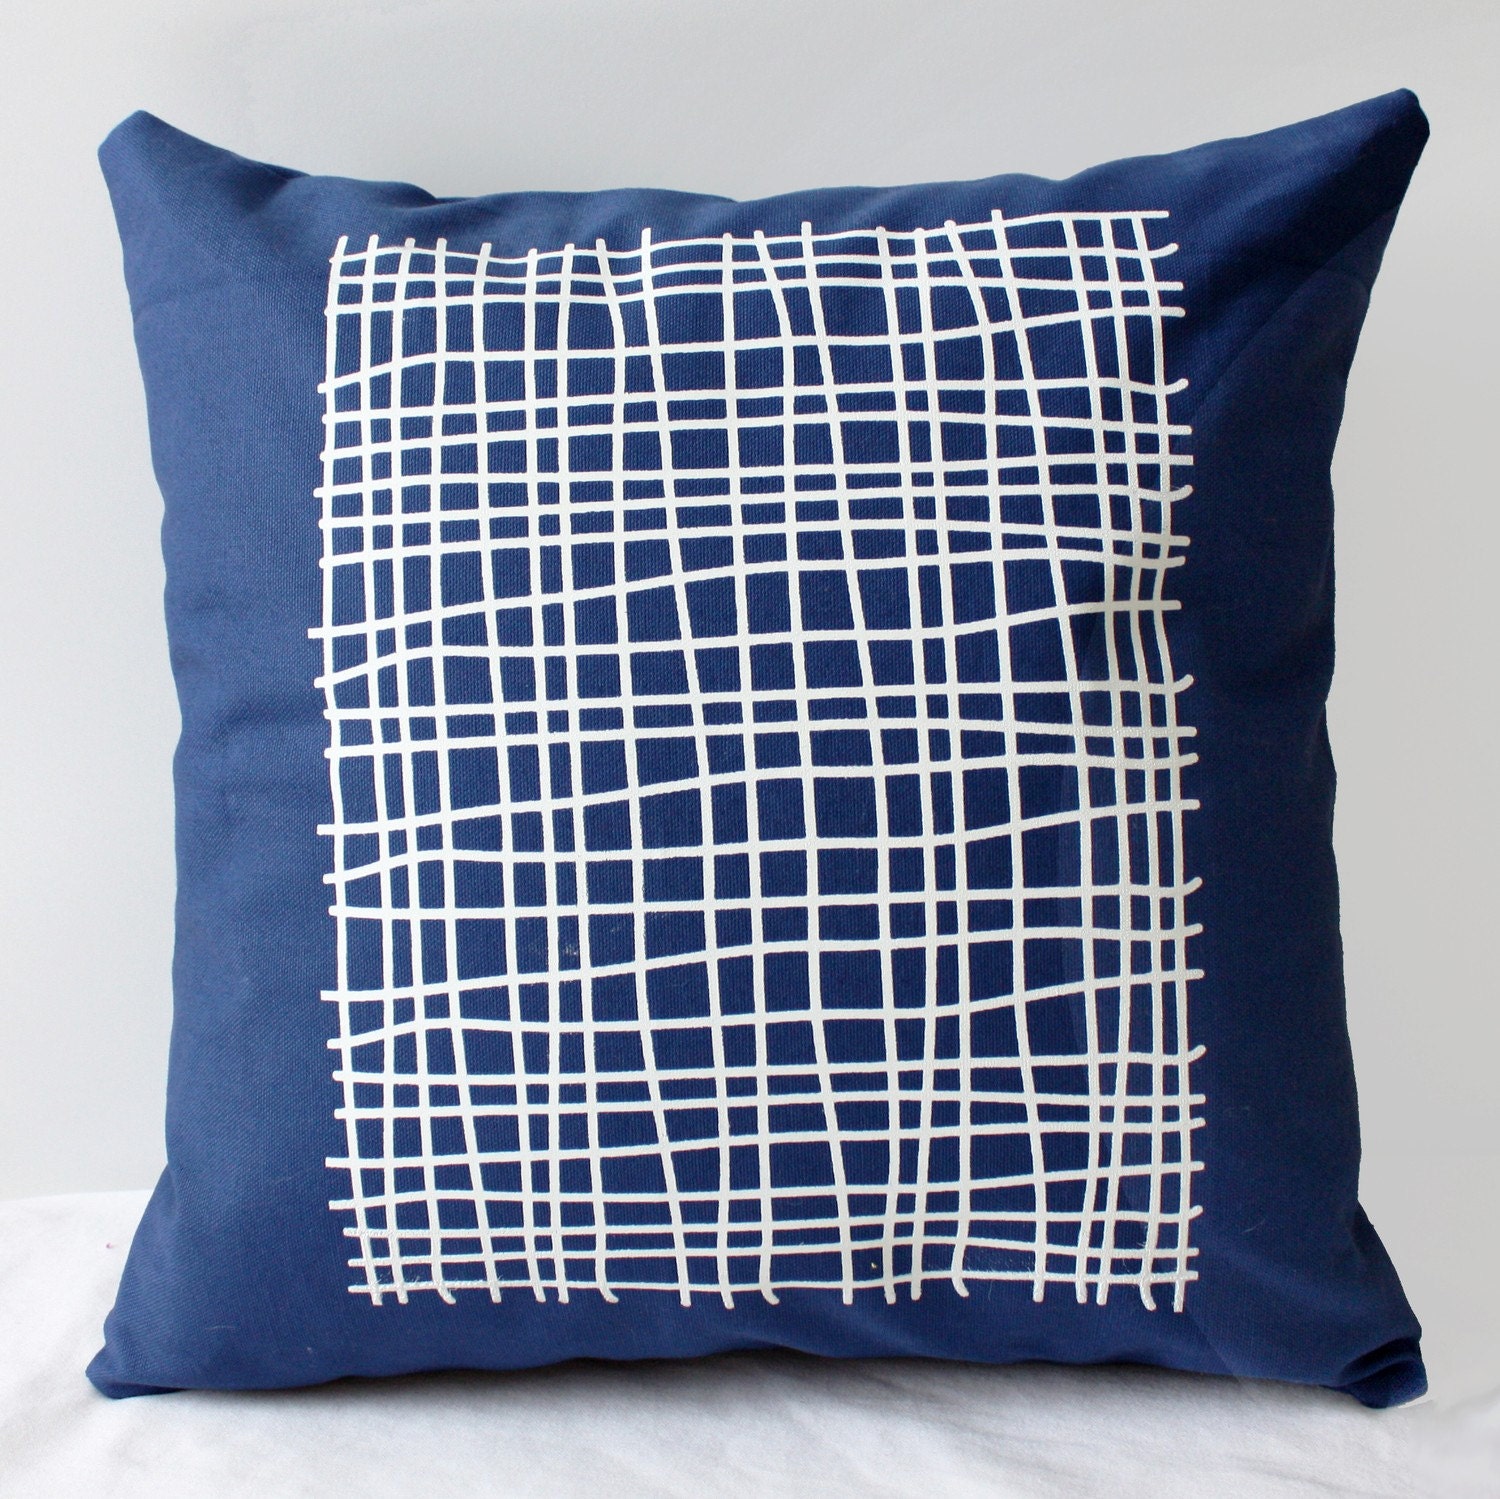 16 in Square Throw Pillow - Navy Blue with Modern Grid print in white ink - wickedmint